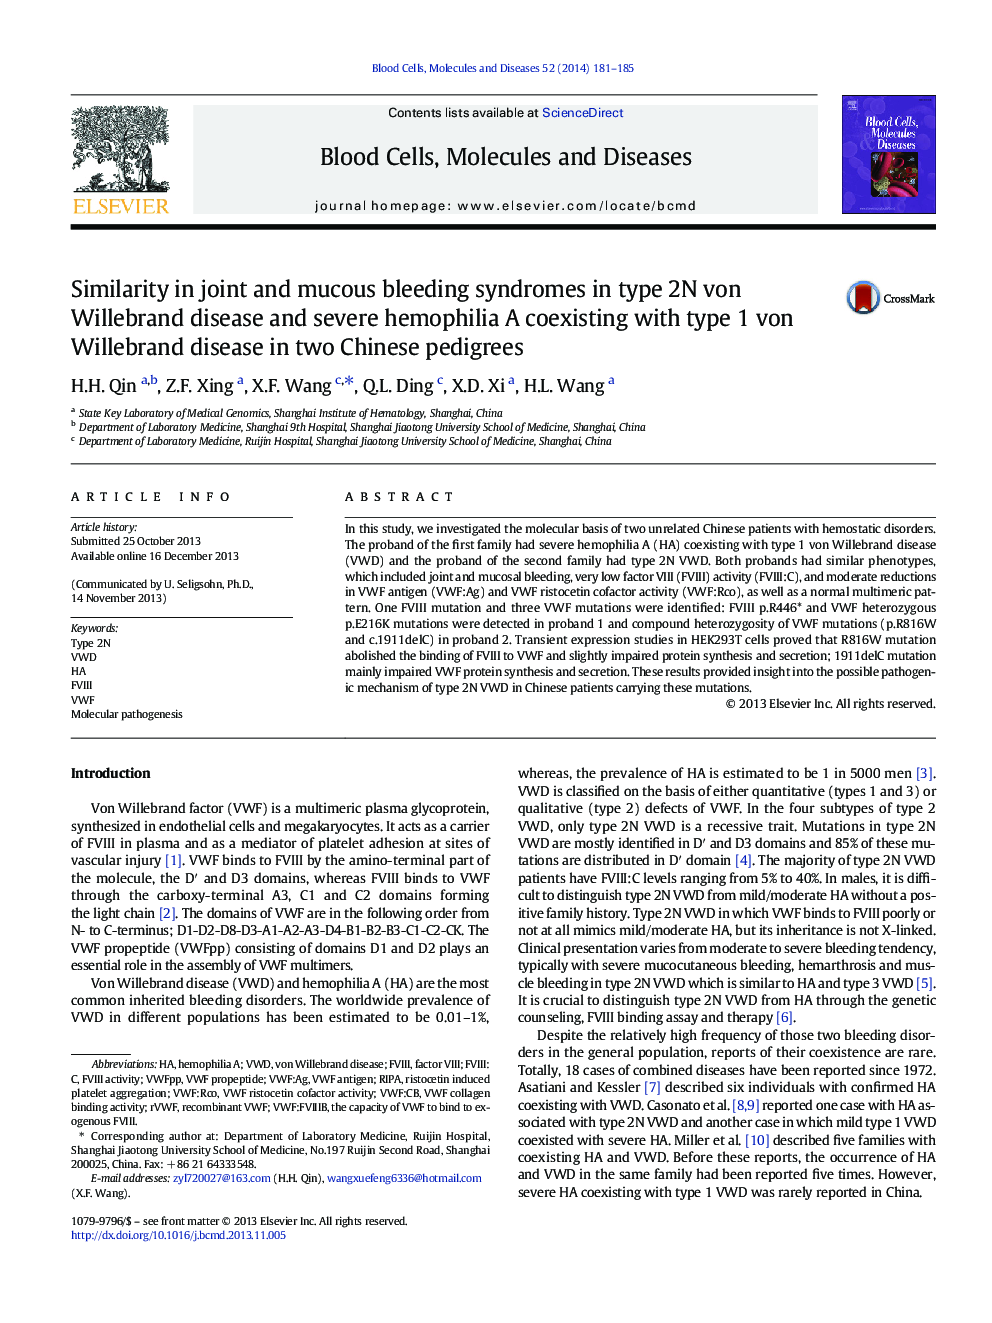 Similarity in joint and mucous bleeding syndromes in type 2N von Willebrand disease and severe hemophilia A coexisting with type 1 von Willebrand disease in two Chinese pedigrees